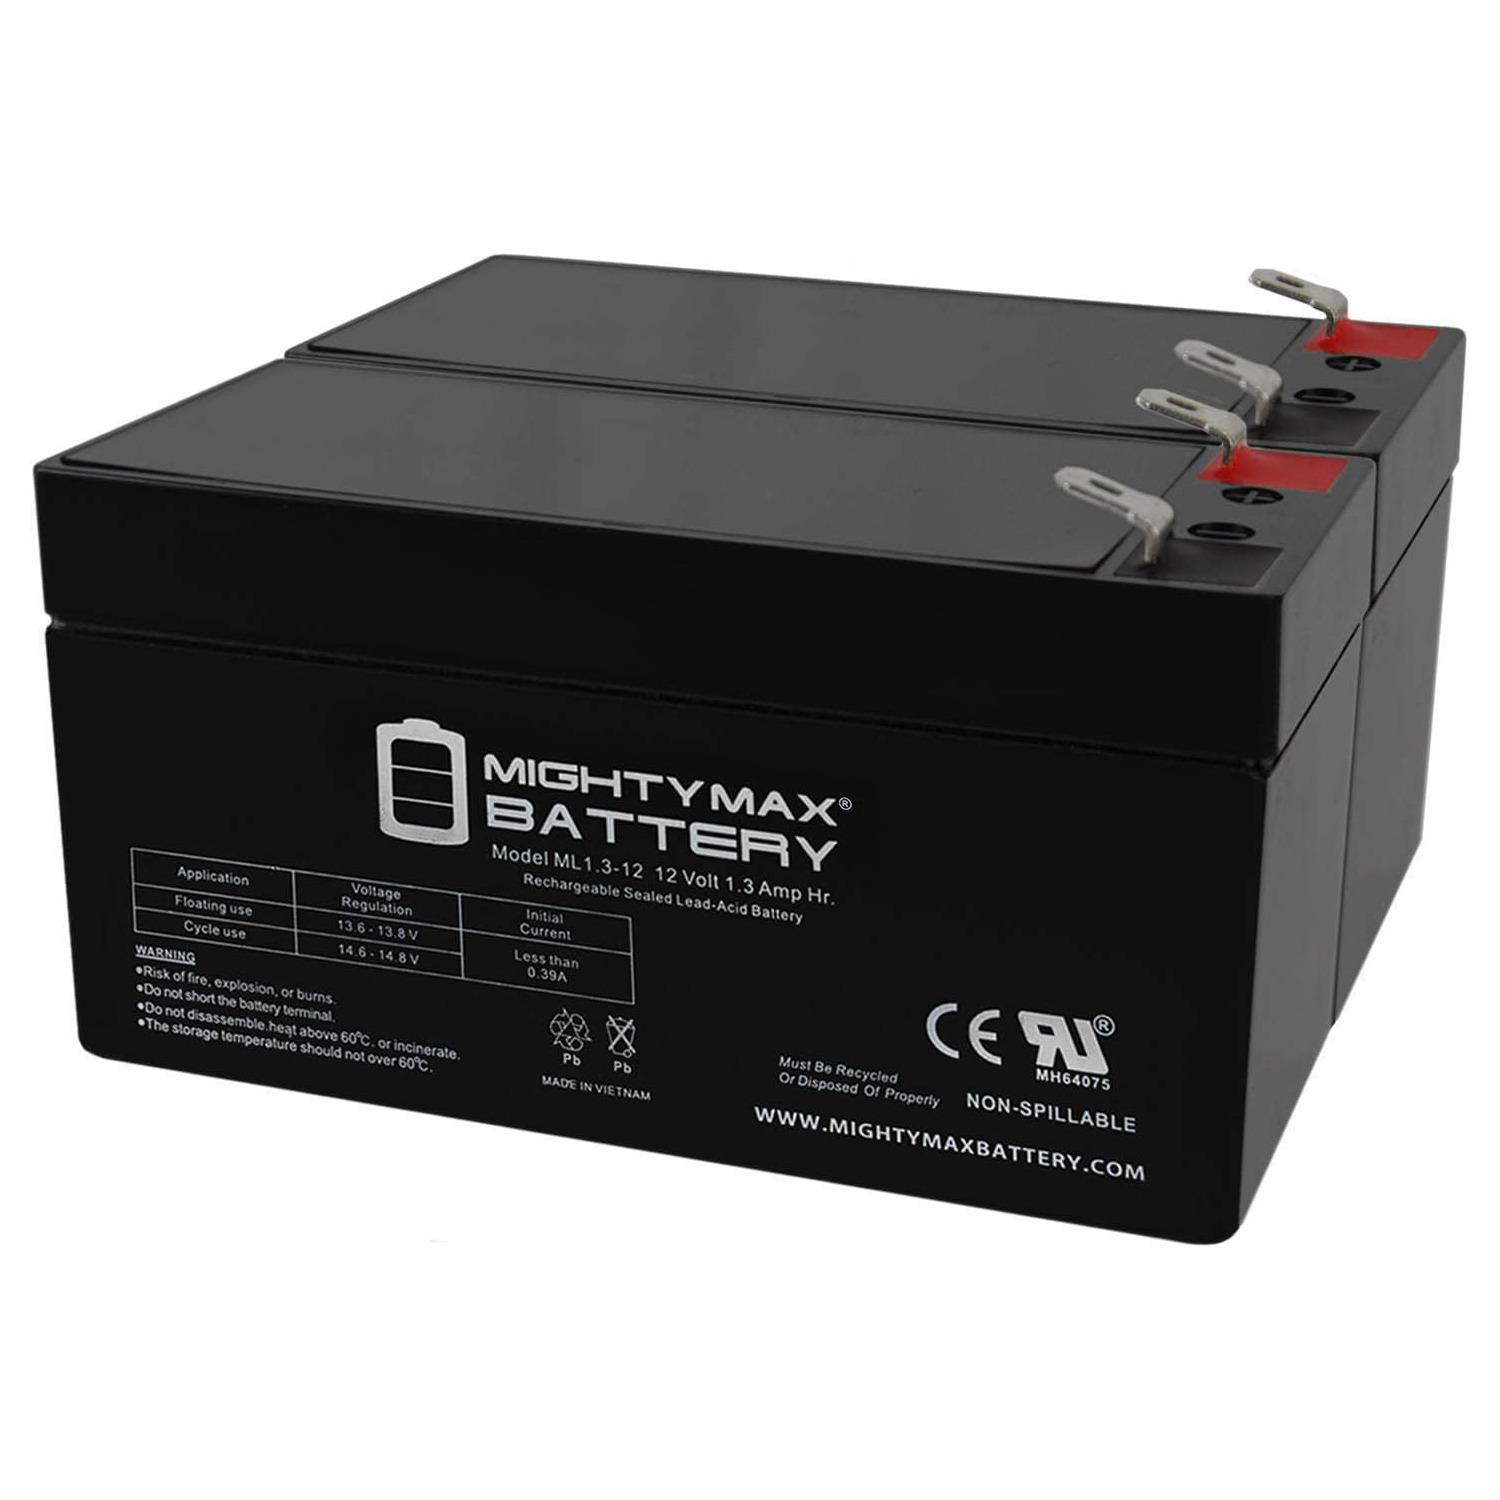 12V 1.3Ah Replacement Battery for Acumax AM1.3-12 - 2 Pack